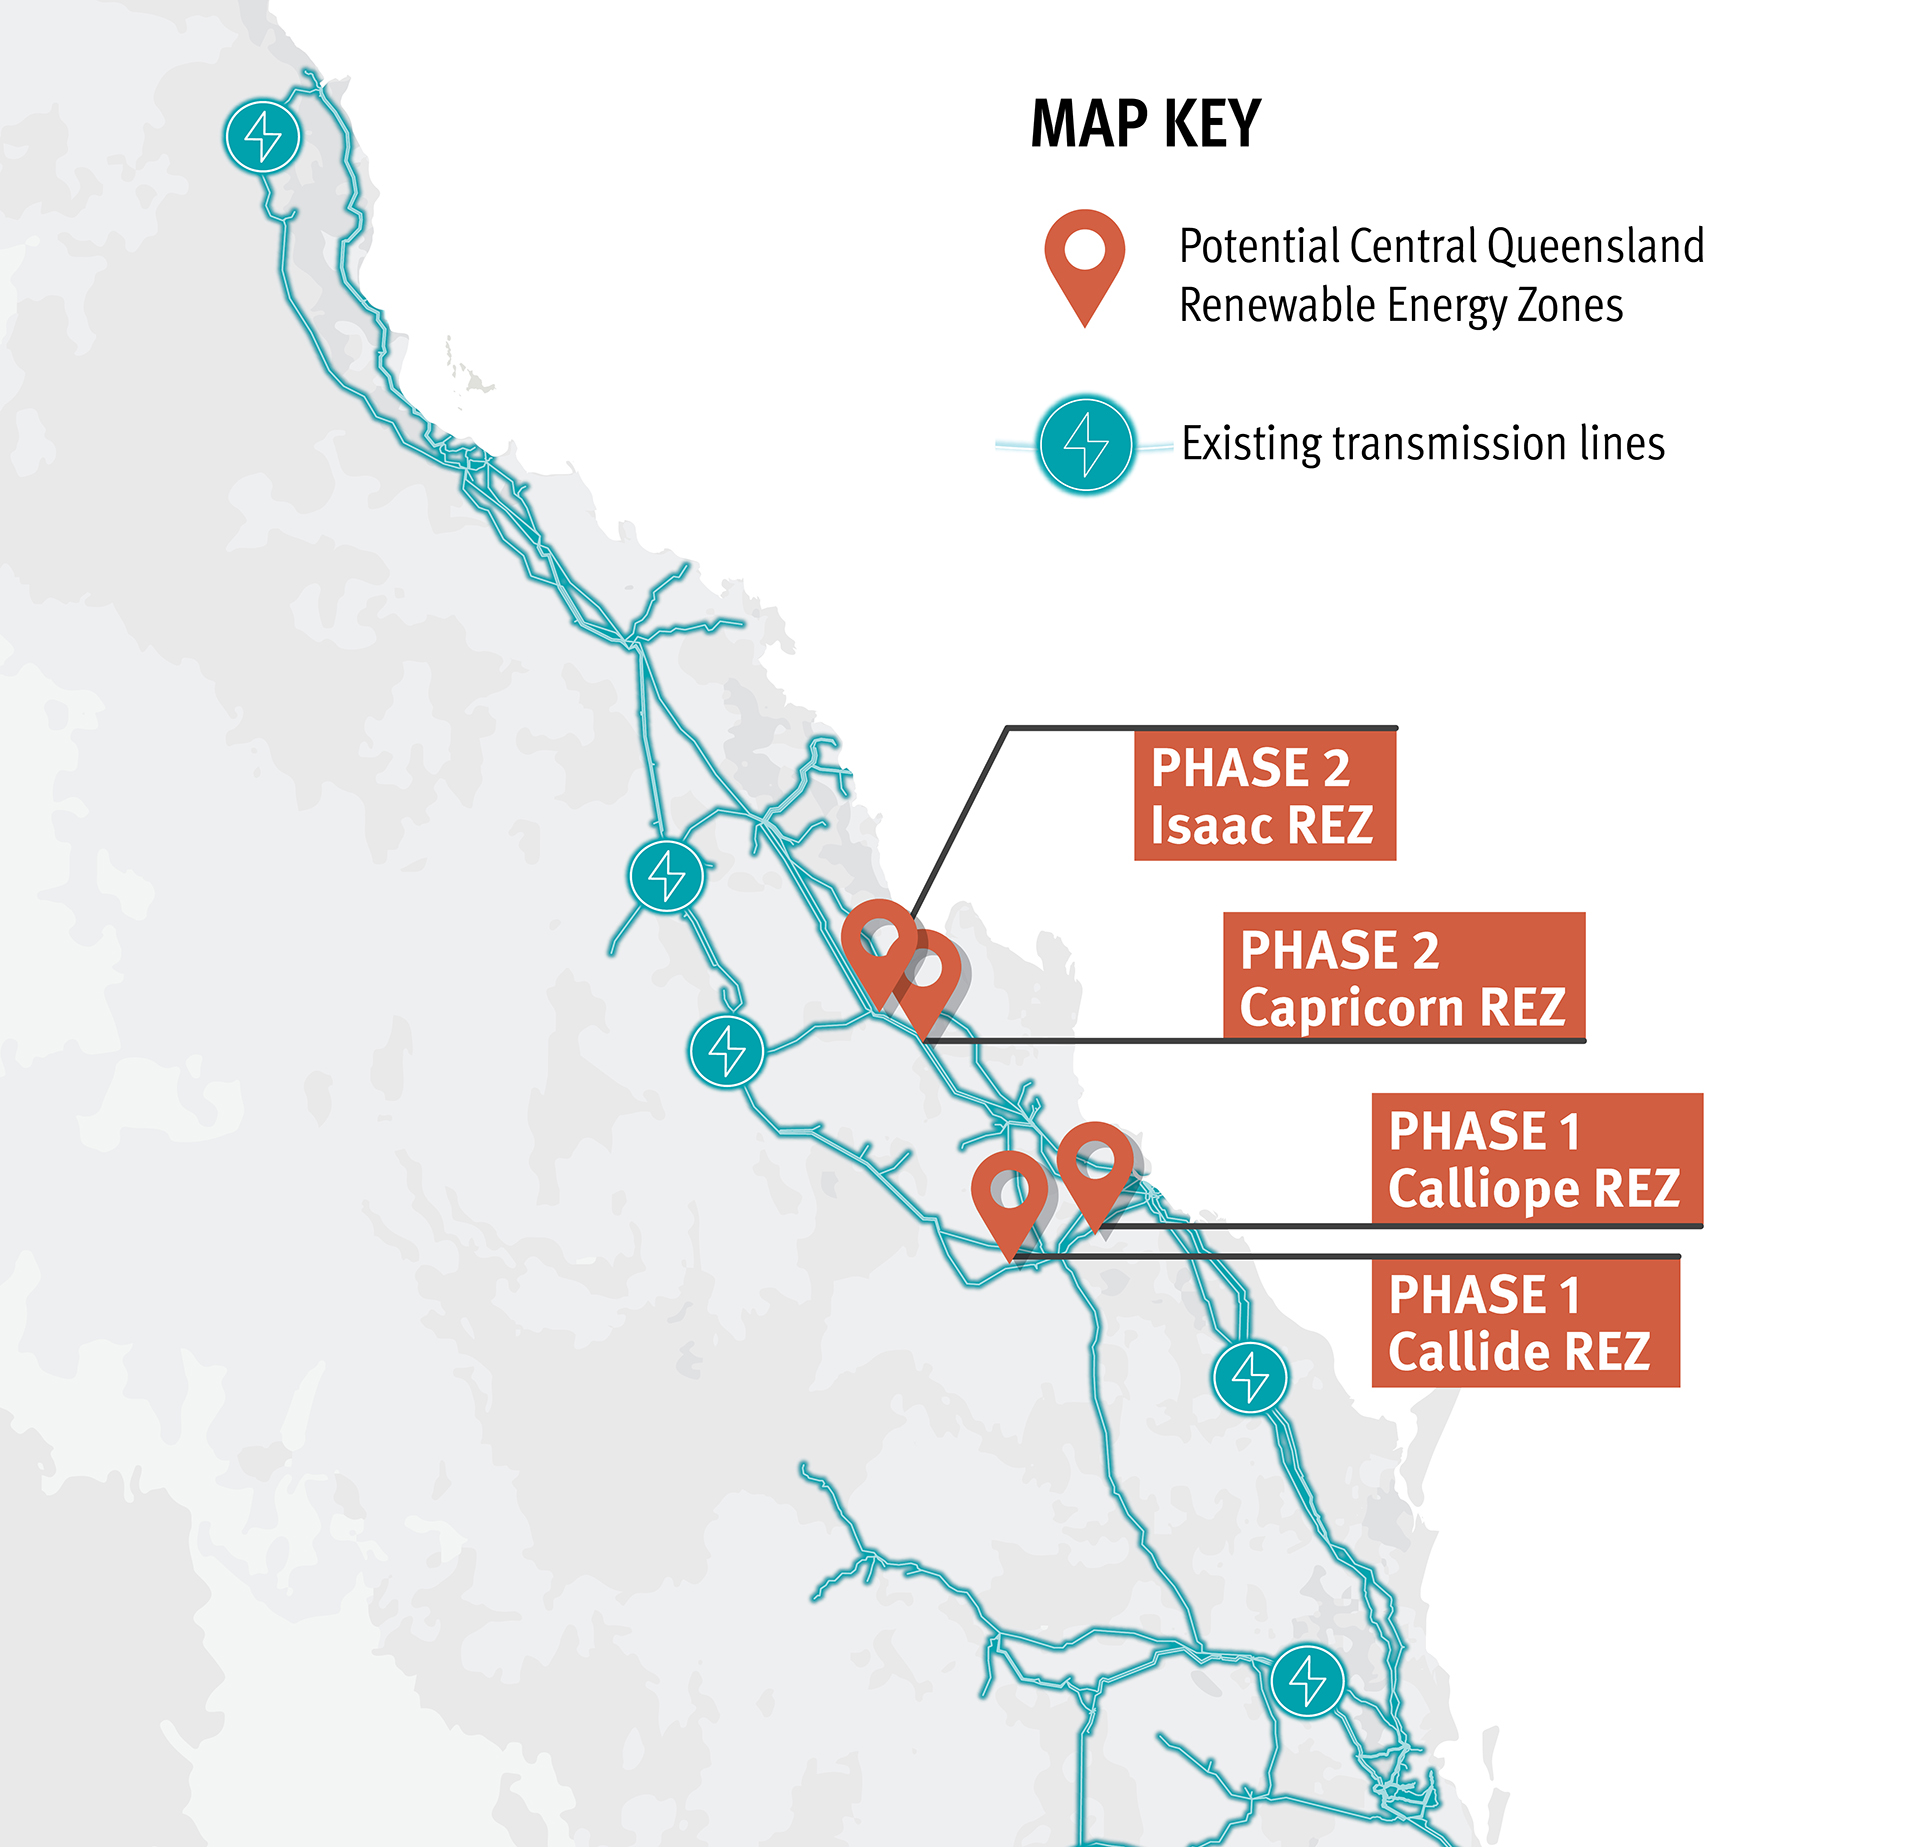 A map of central Queensland that uses a pin icon to show locations for four potential renewable energy zones known as REZs